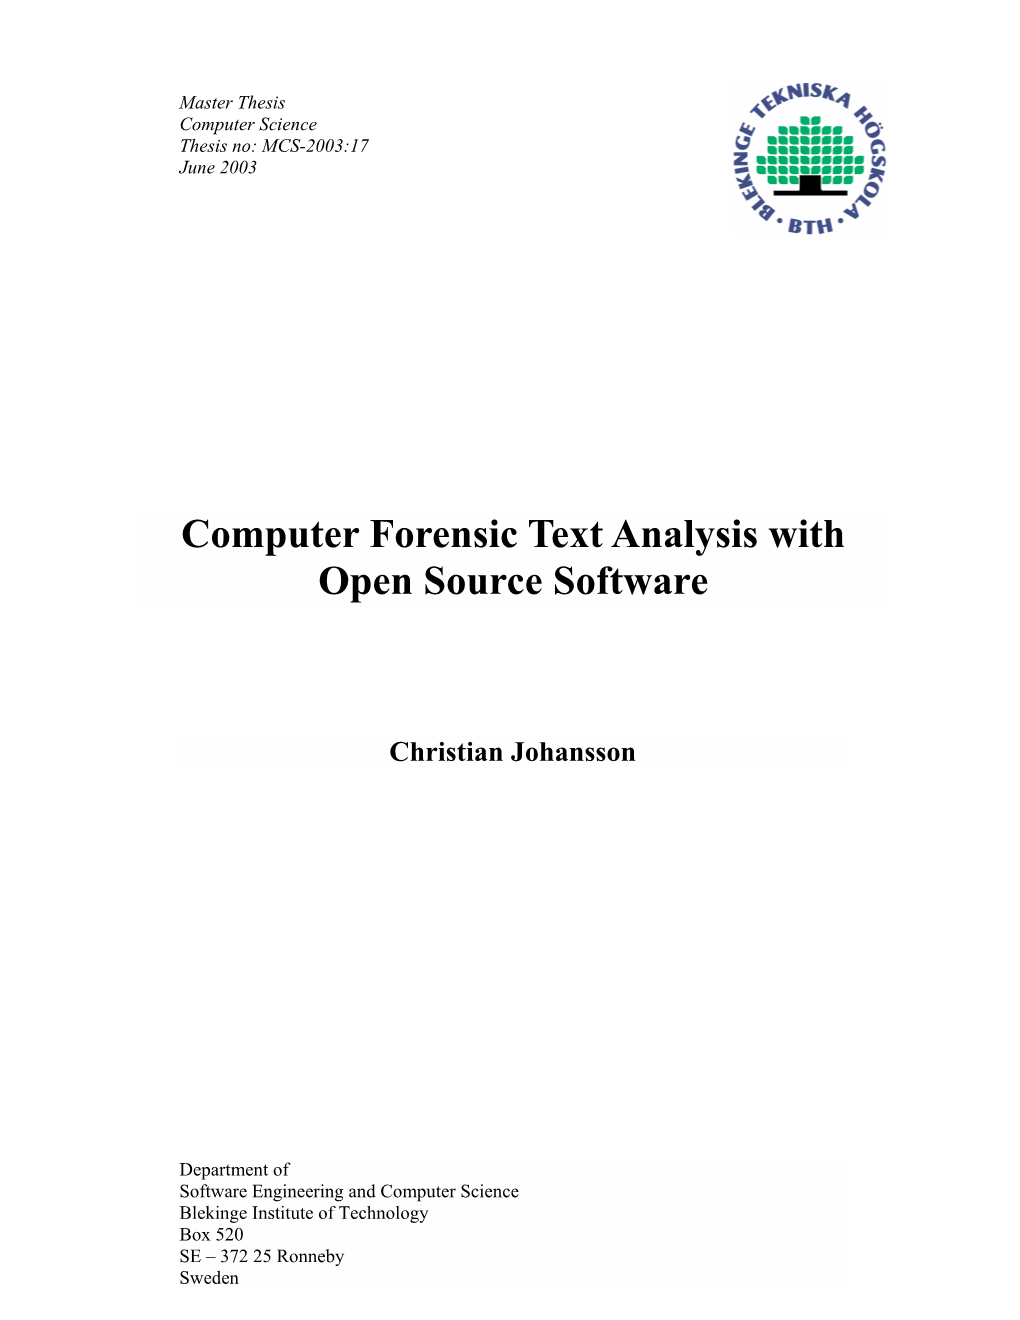 Computer Forensic Text Analysis with Open Source Software